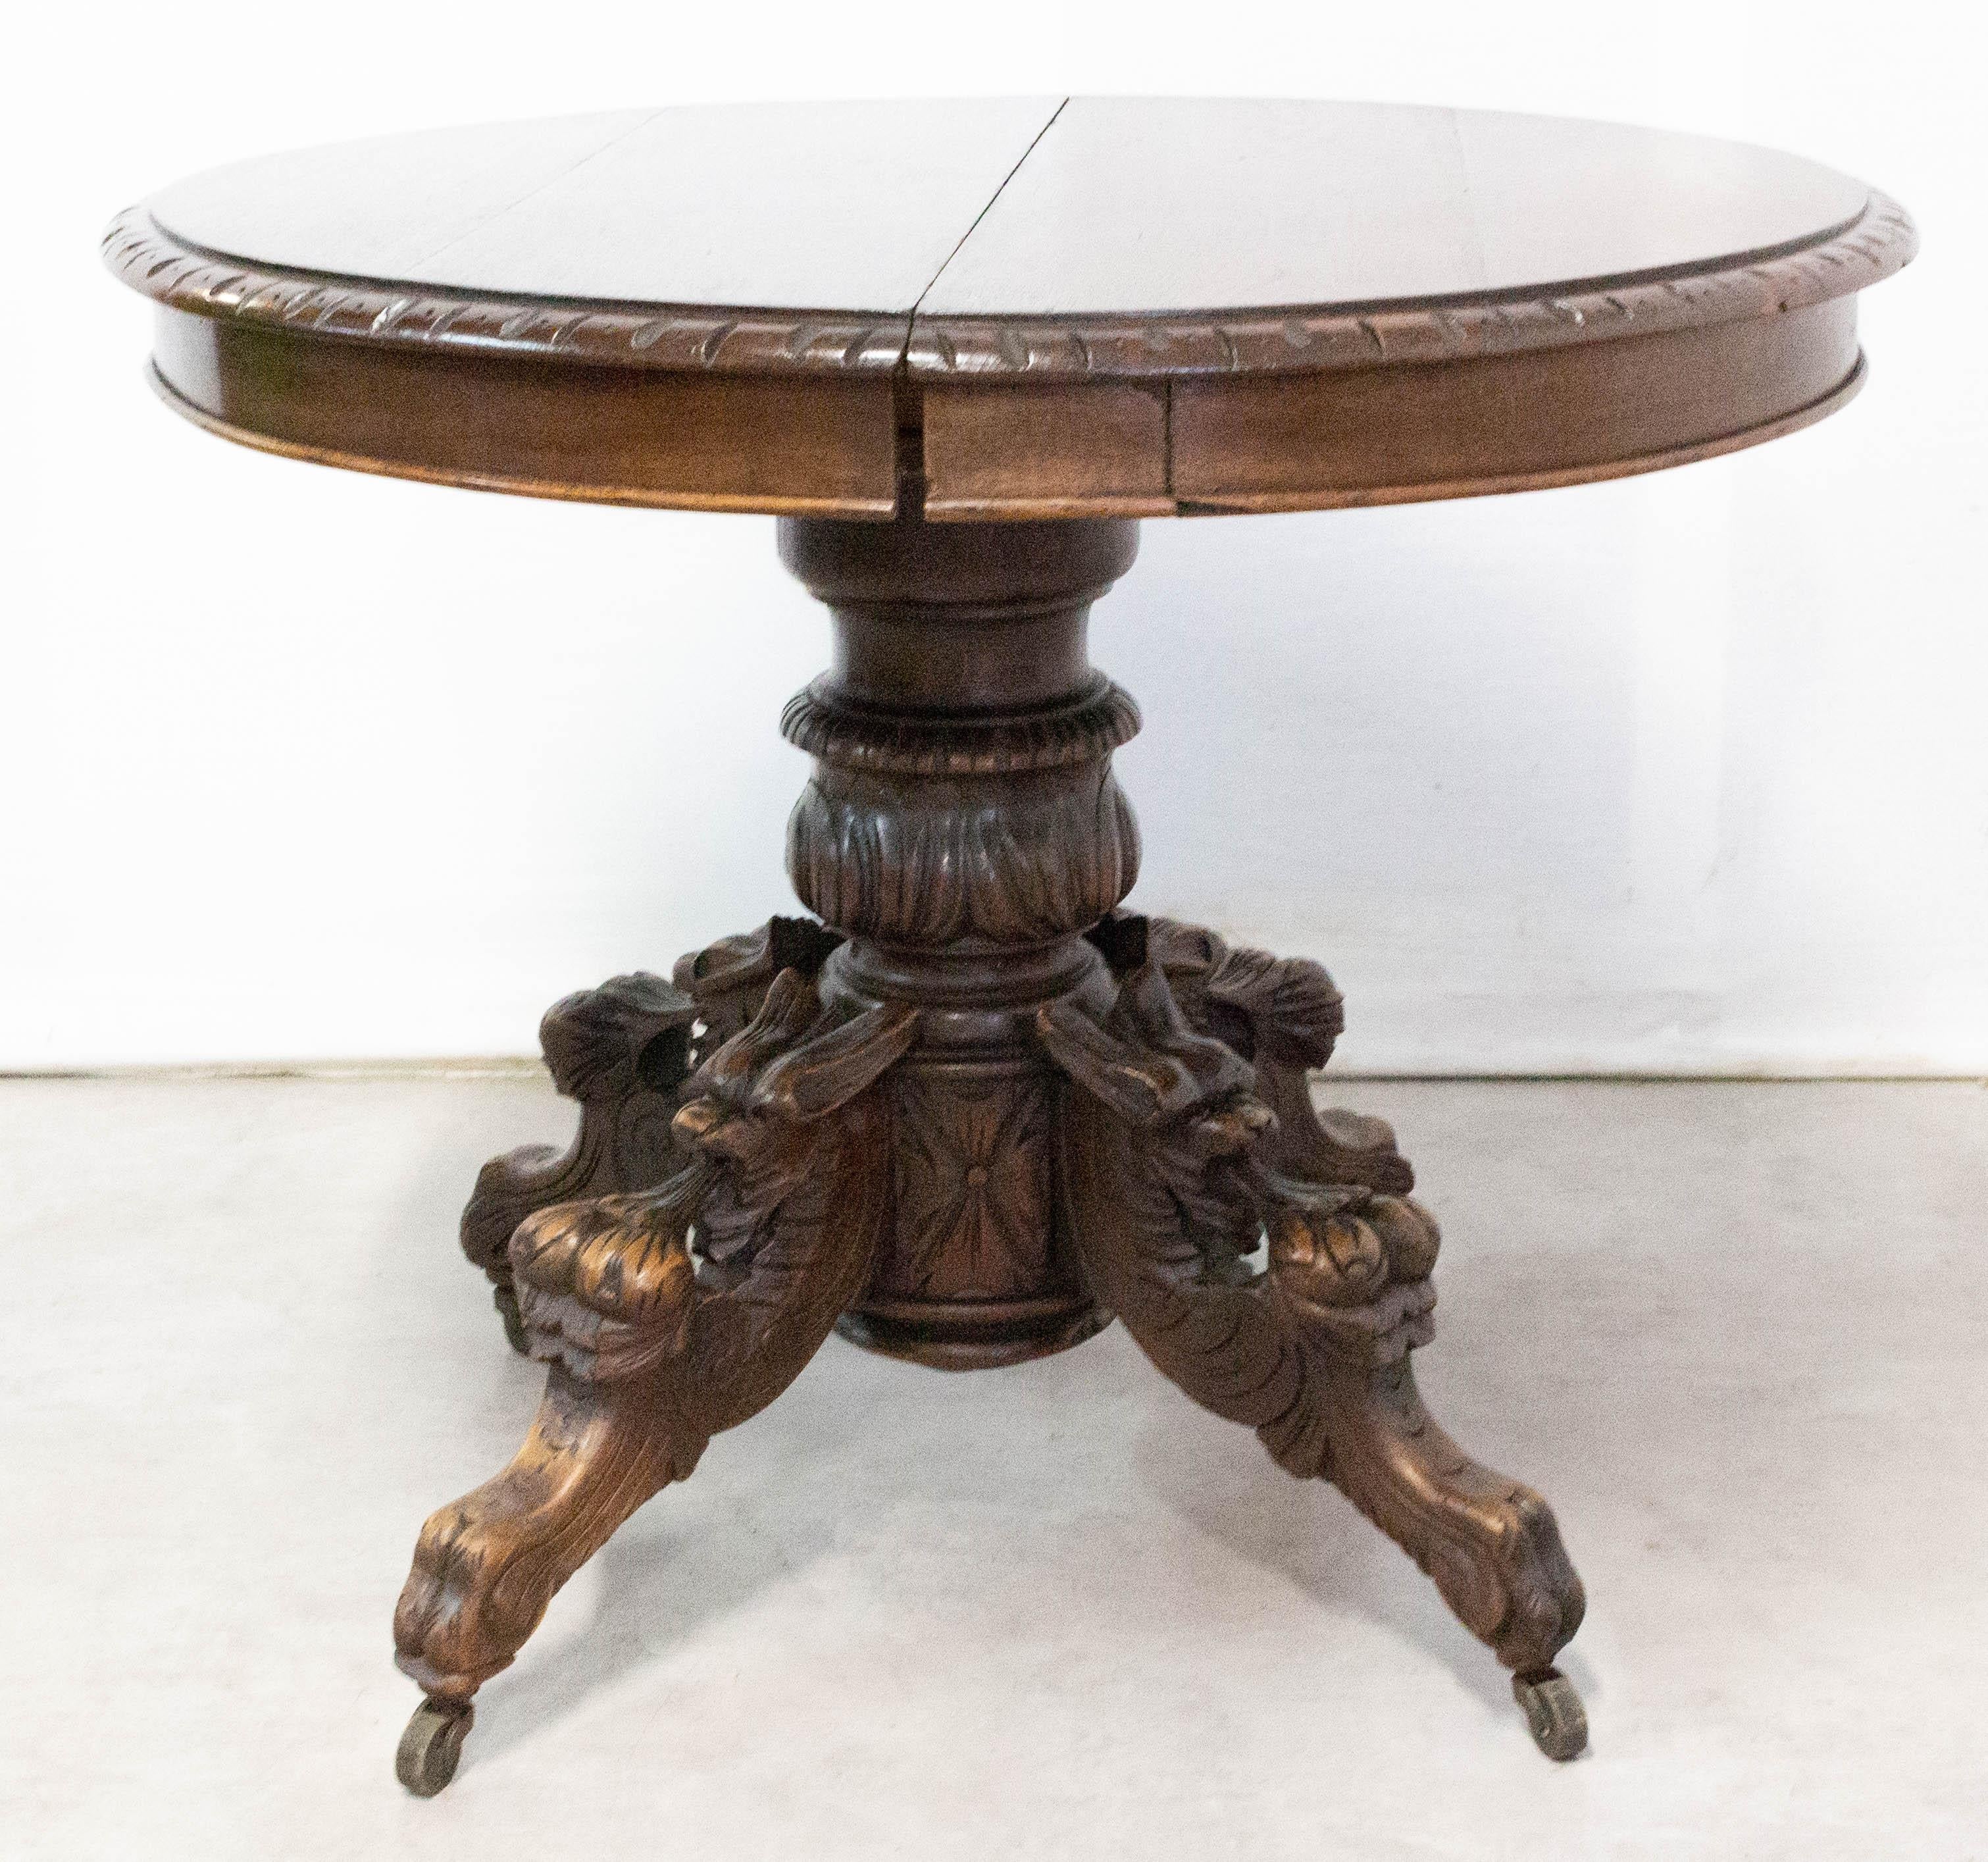 Pedestal table with grotesques, side table, French late 19th century.
Raised on four swept legs.
Hand carved oak.
The table legs are mounted on casters.
We can make at your request extends for an addition of 450 €
Good antique condition with